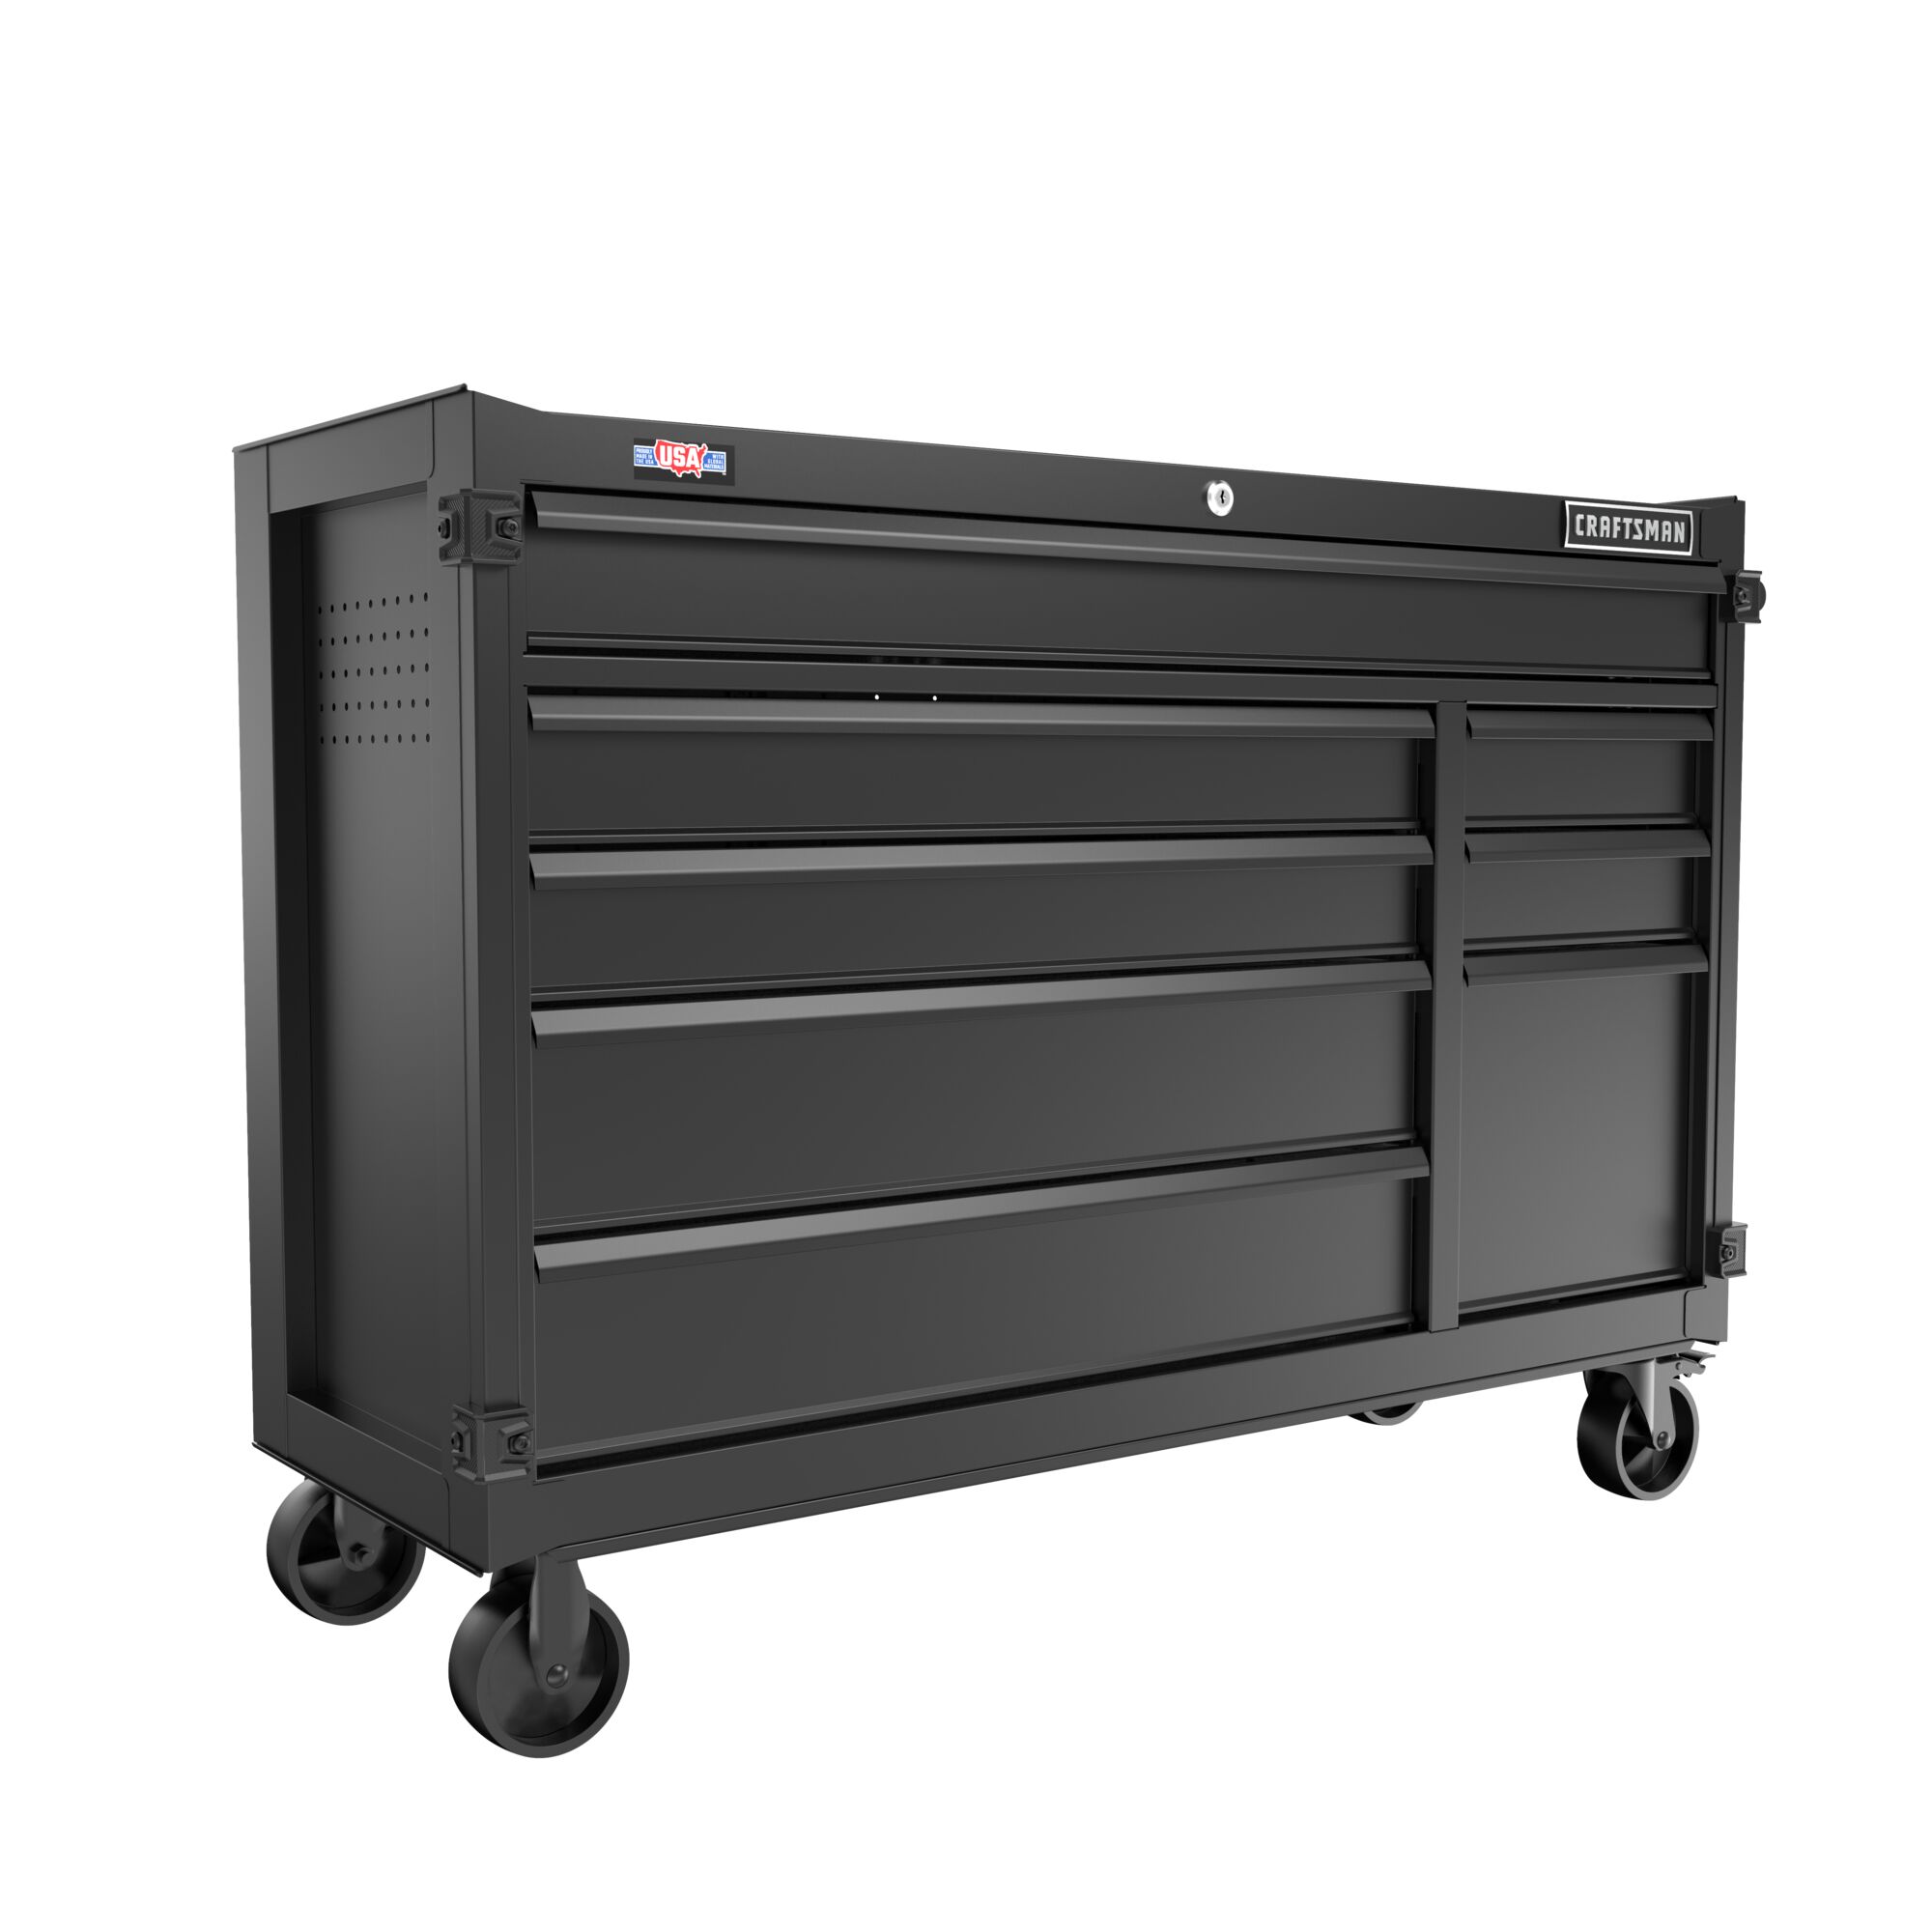 CRAFTSMAN 52-inch Wide 8-Drawer Rolling Tool Cabinet at 3/4 turn